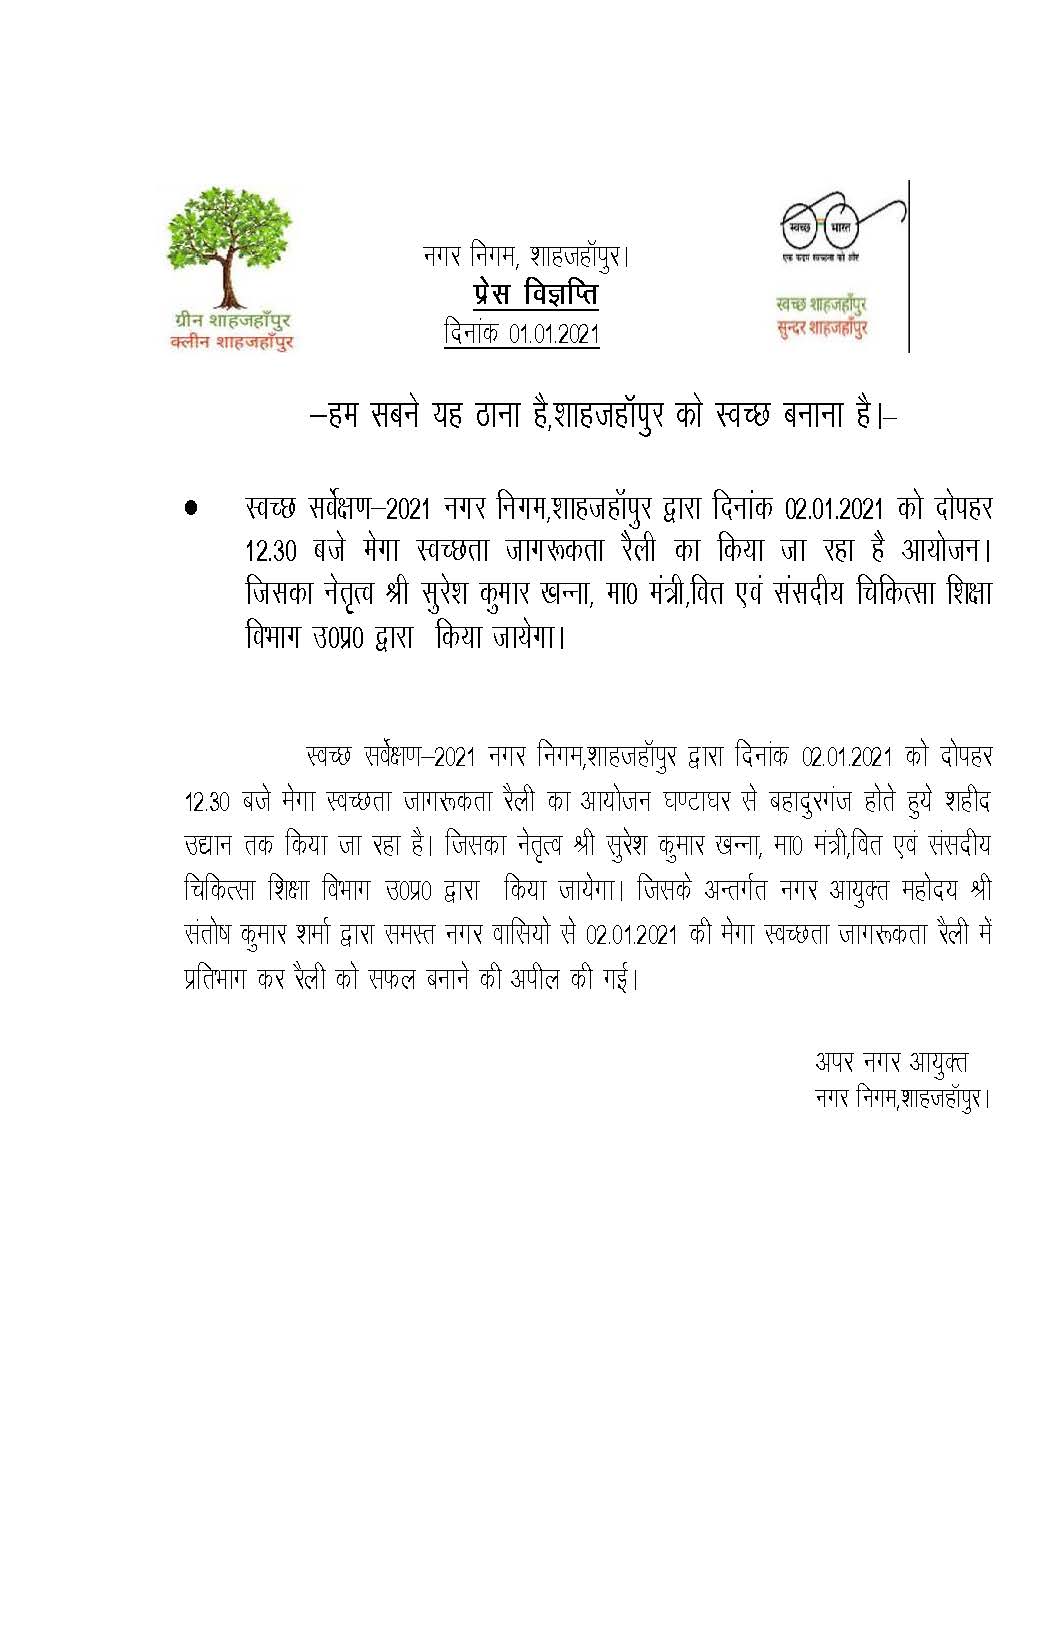 Regarding “Mega Swachchtaa Awareness Rally” to be organised at 1230 hours on 02.01.2021 in the city by Municipal Corporation Shahjahanpur.